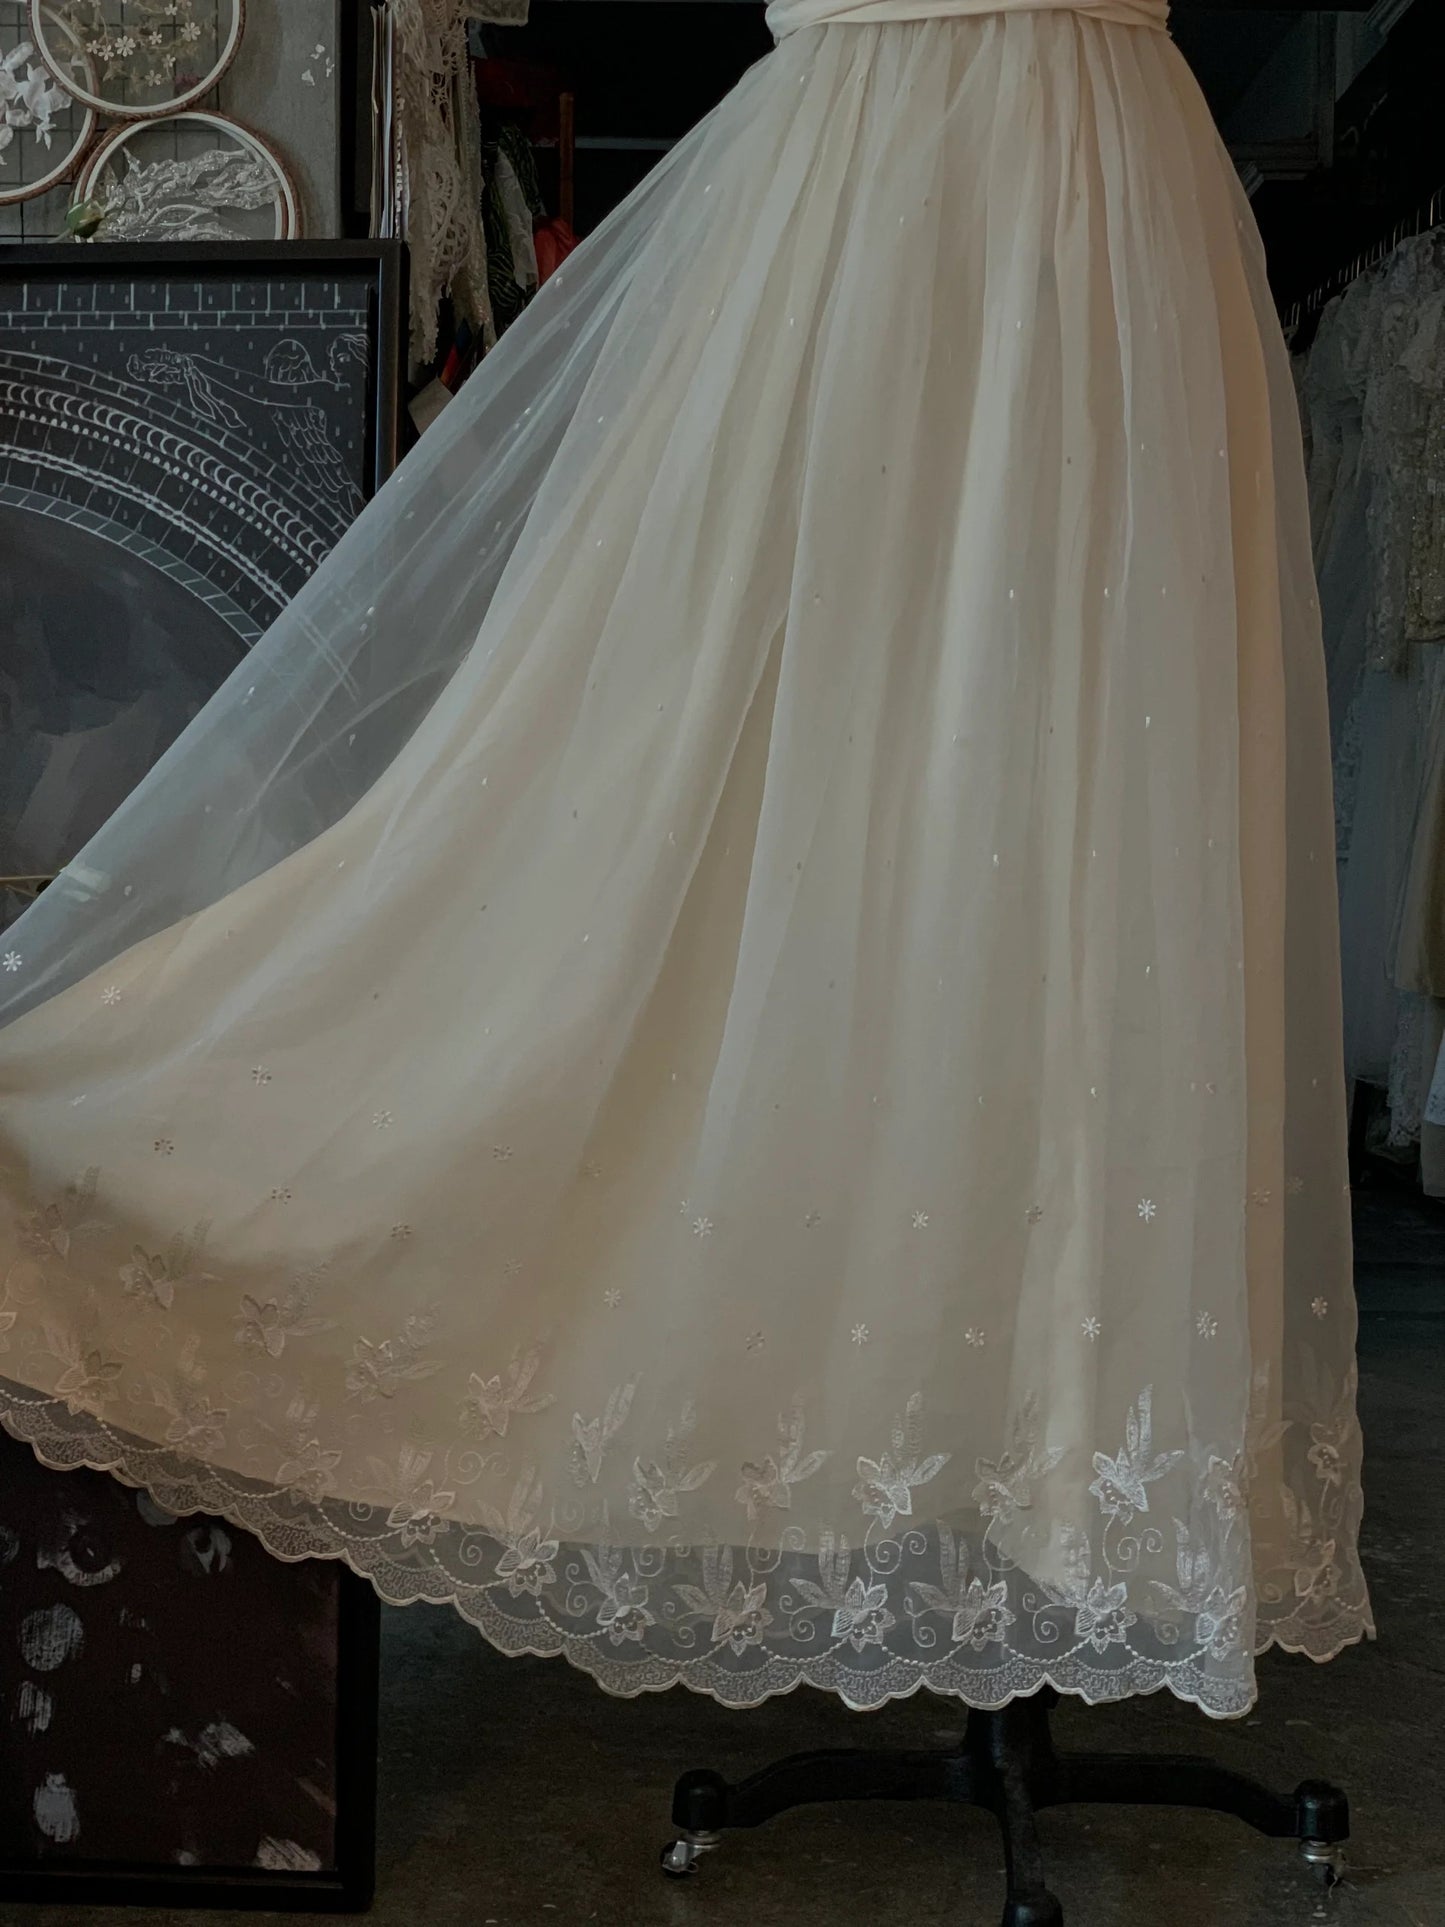 Vintage Style 70s Ankle Length Wedding Dress - DollyGown